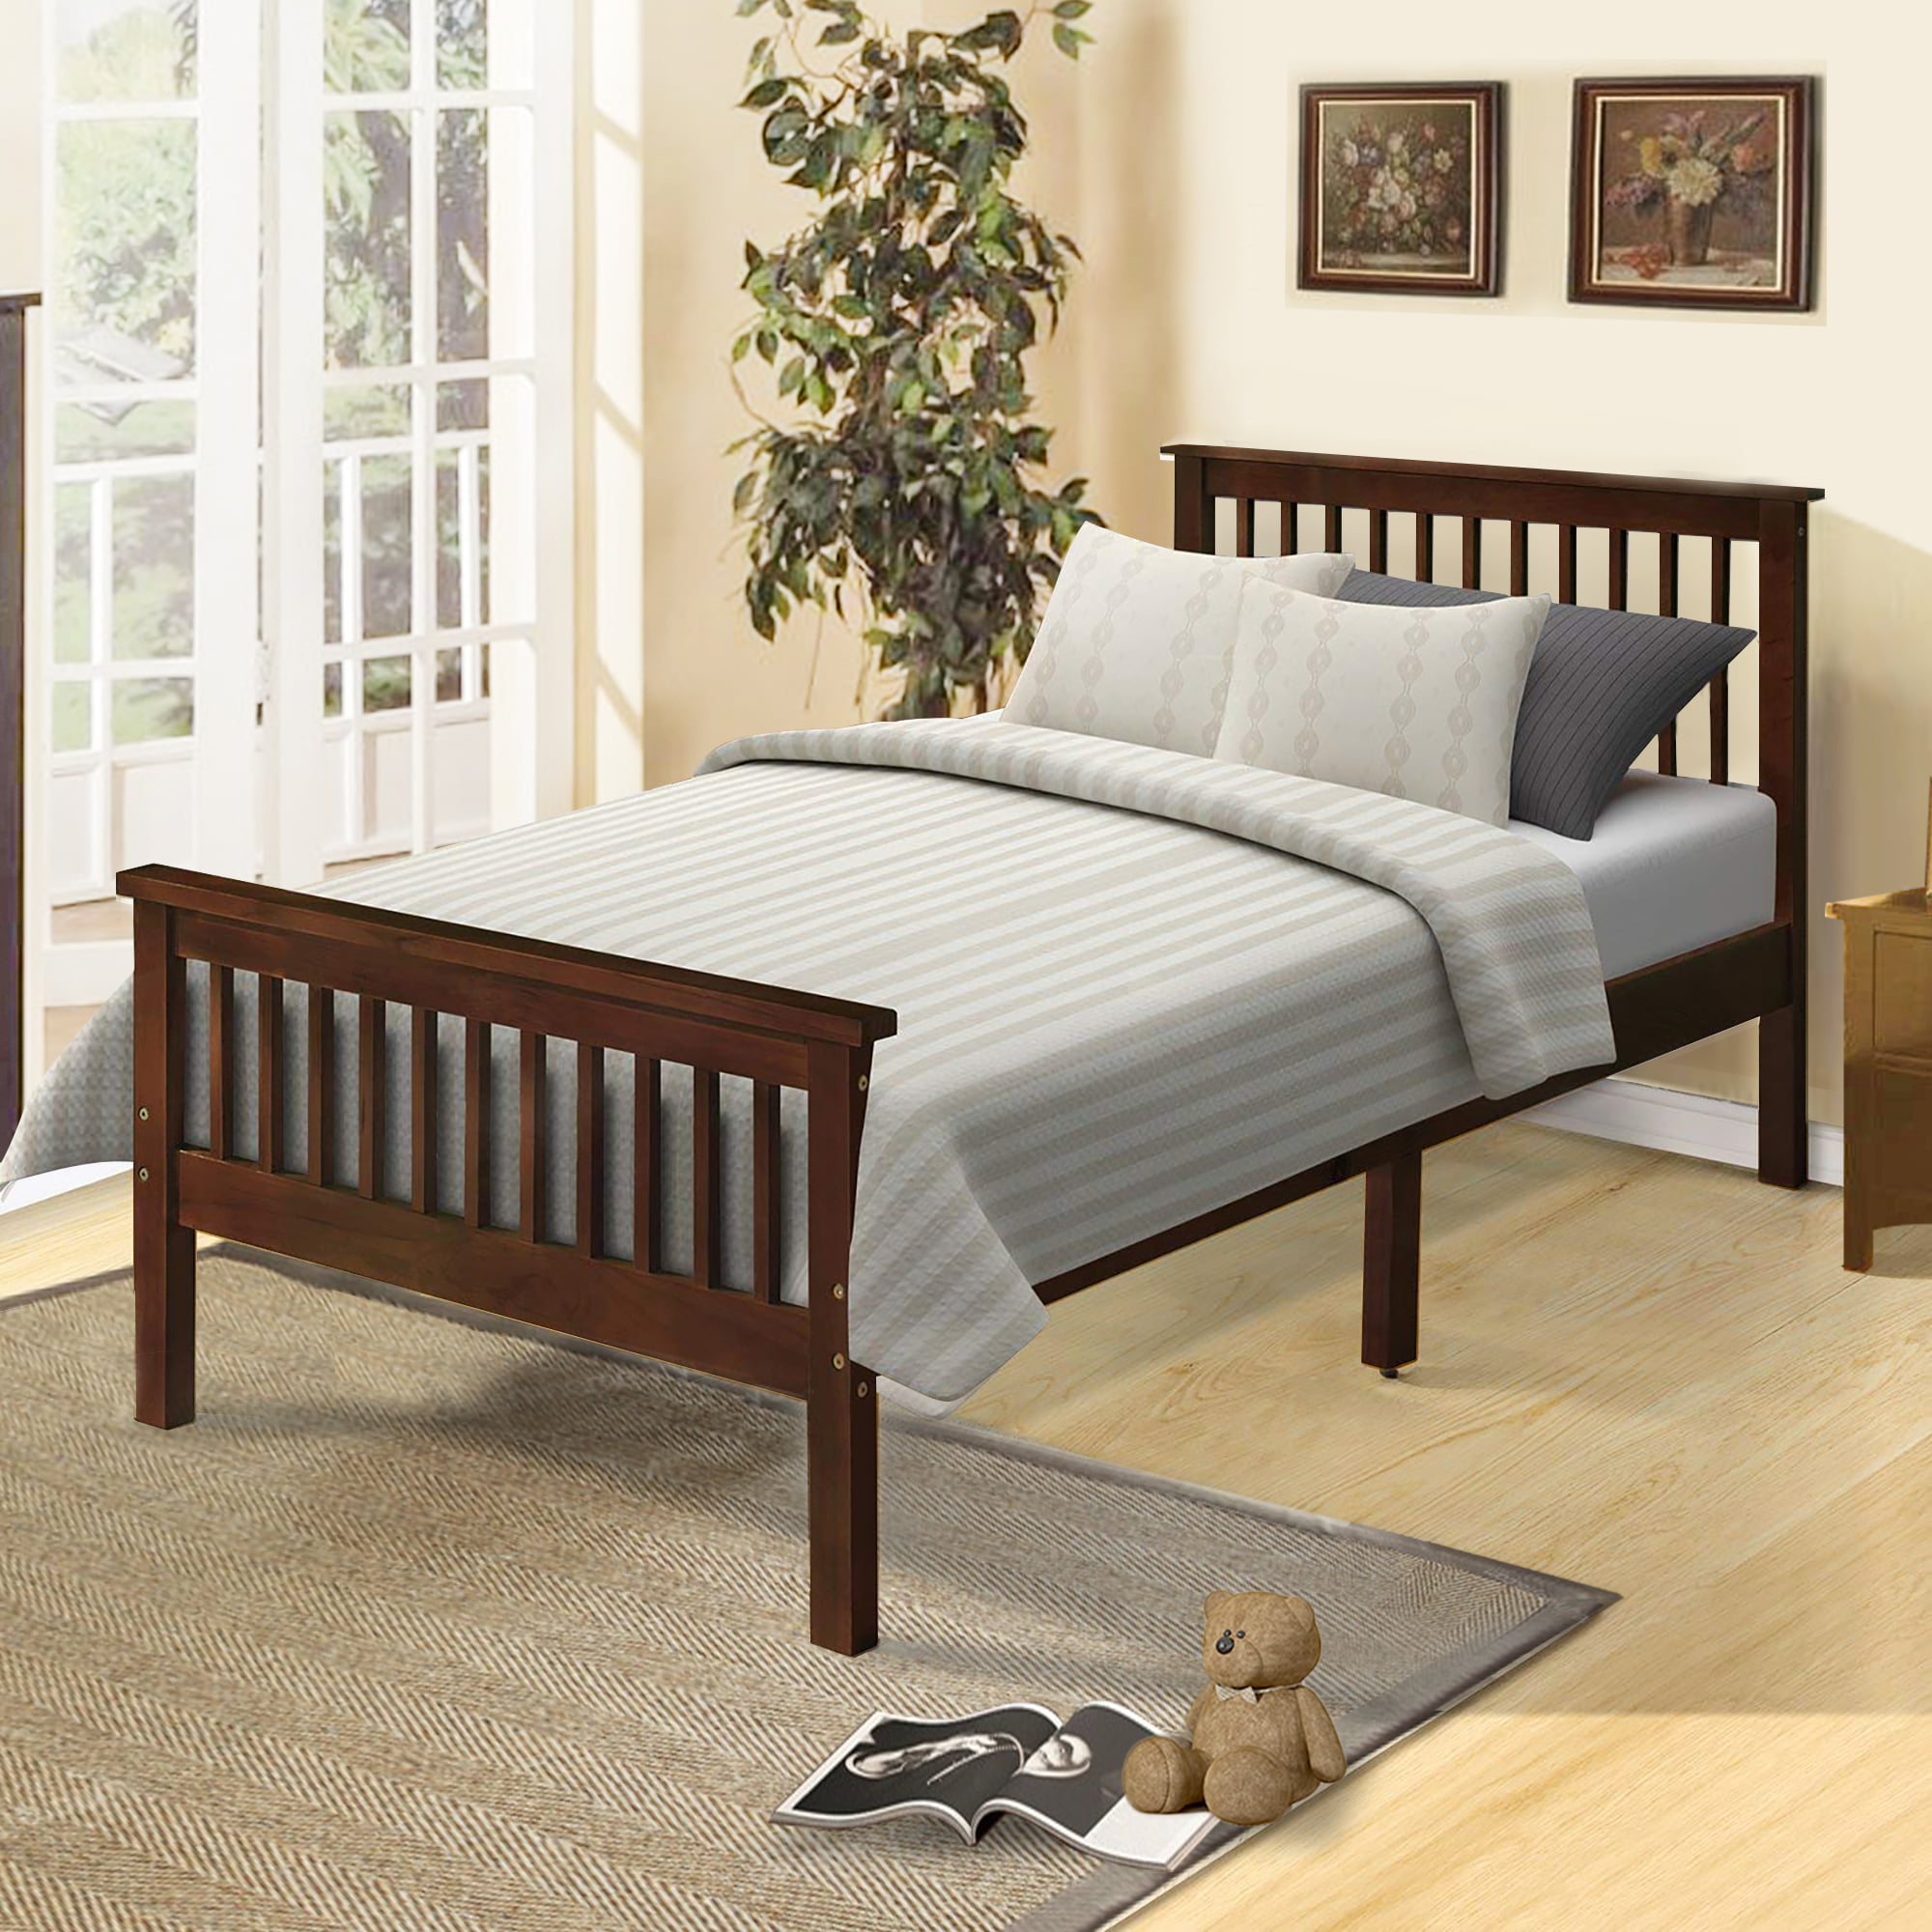 Clearance! Twin Bed Frame for Kids, Classic Platform Bed Frame with